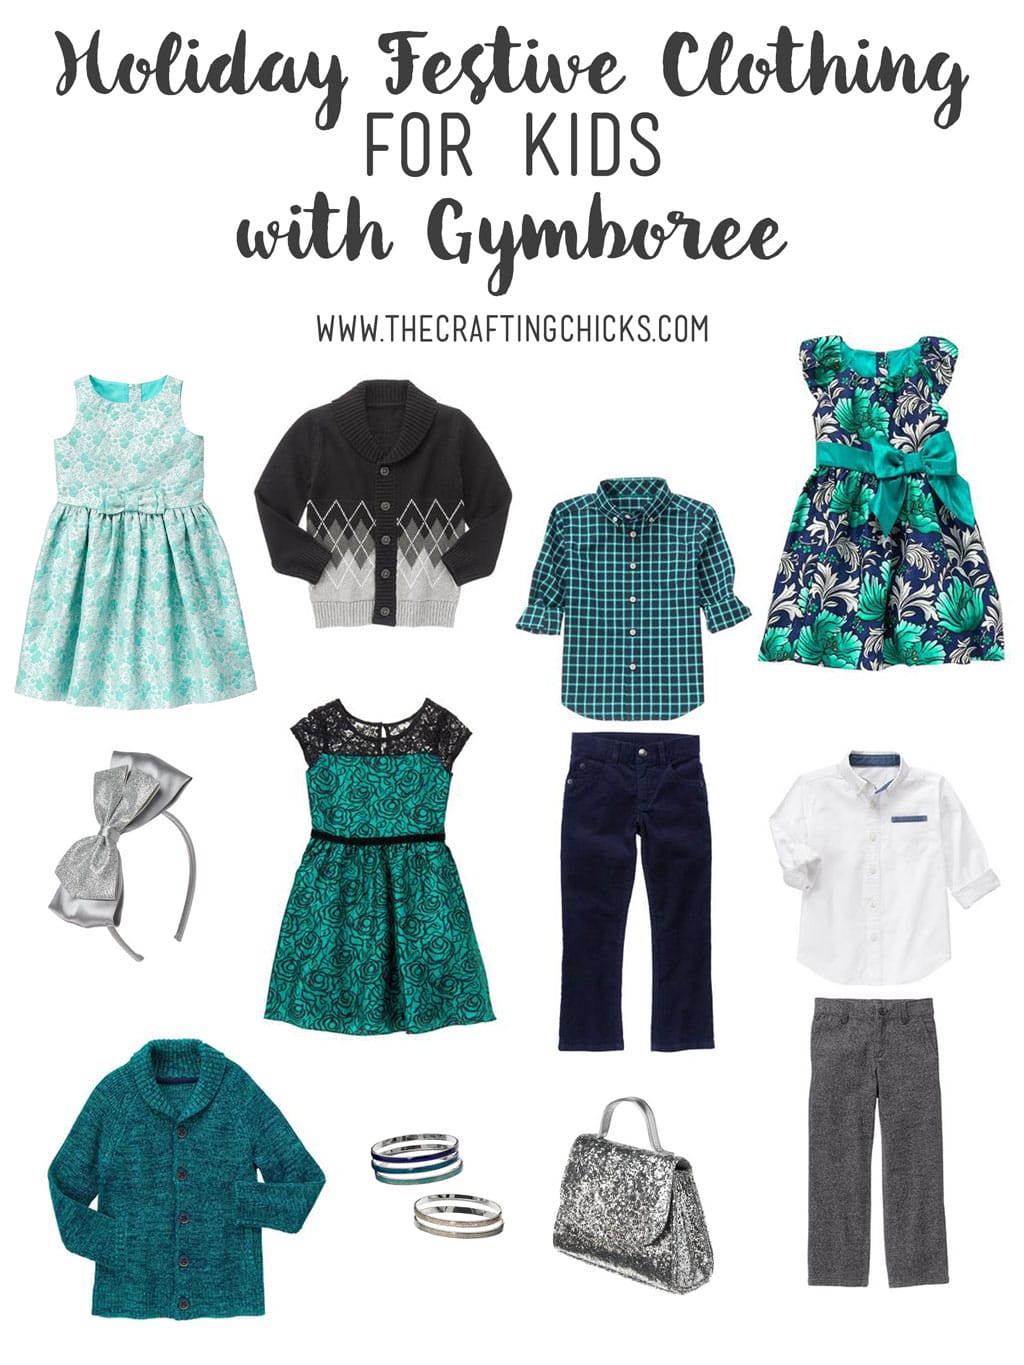 Holiday Festive Clothing for kids with Gymboree. This clothing guide will help you pick the perfect outfits for your kids 